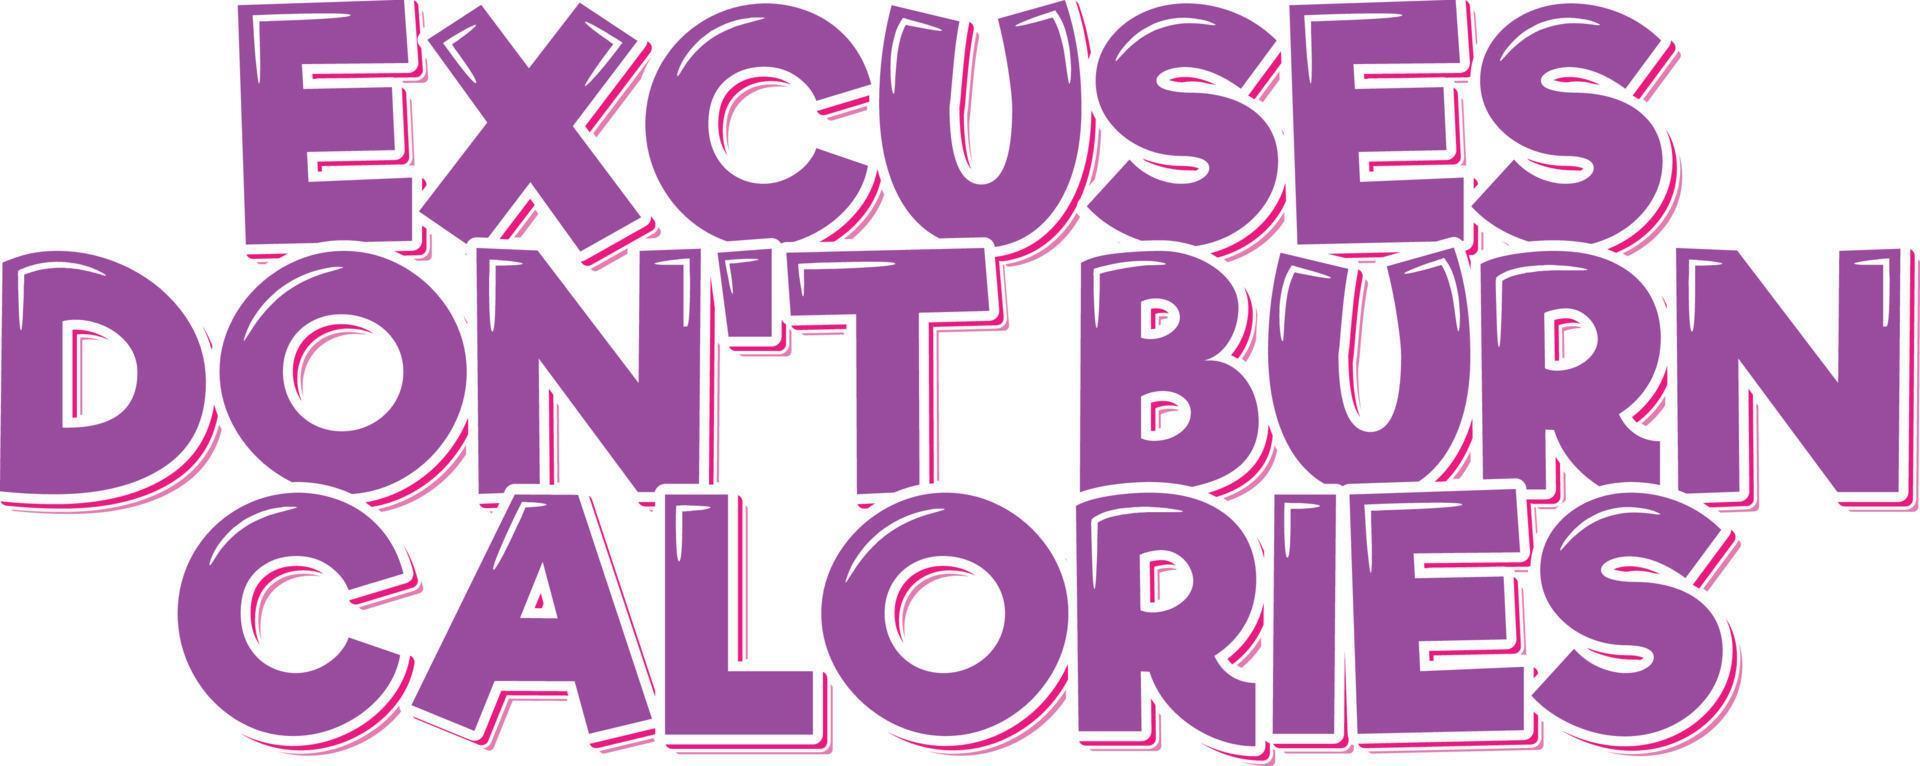 Excuses Don't Burn Calories Lettering Vector